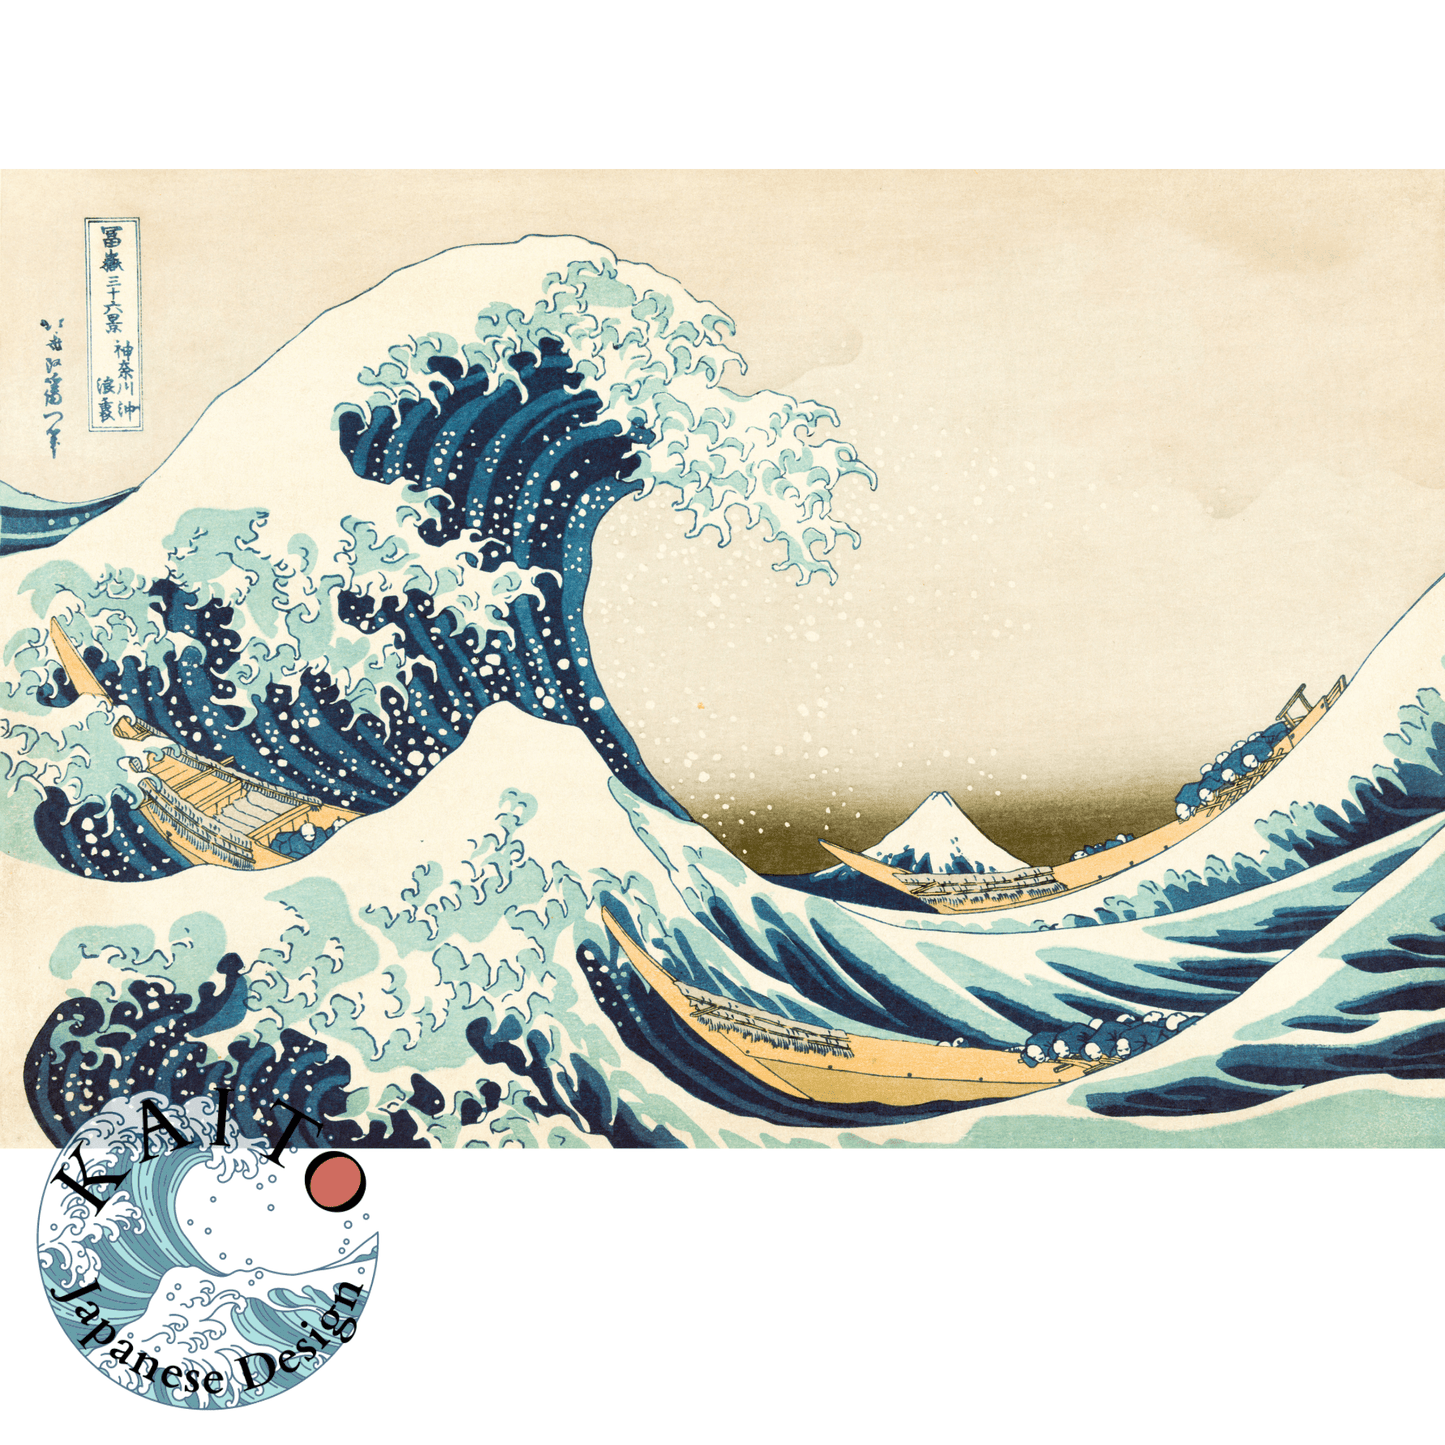 Under the Wave off Kanagawa (Kanagawa oki nami ura), also known as The Great Wave, from the series Thirty-six Views of Mount Fuji (Fugaku sanjūrokkei) by Katsushika Hokusai . Design applied on the back of the hoodie, with 2 waves on the fron pocket and the full painting inside the hood. The hoodie is royal blue